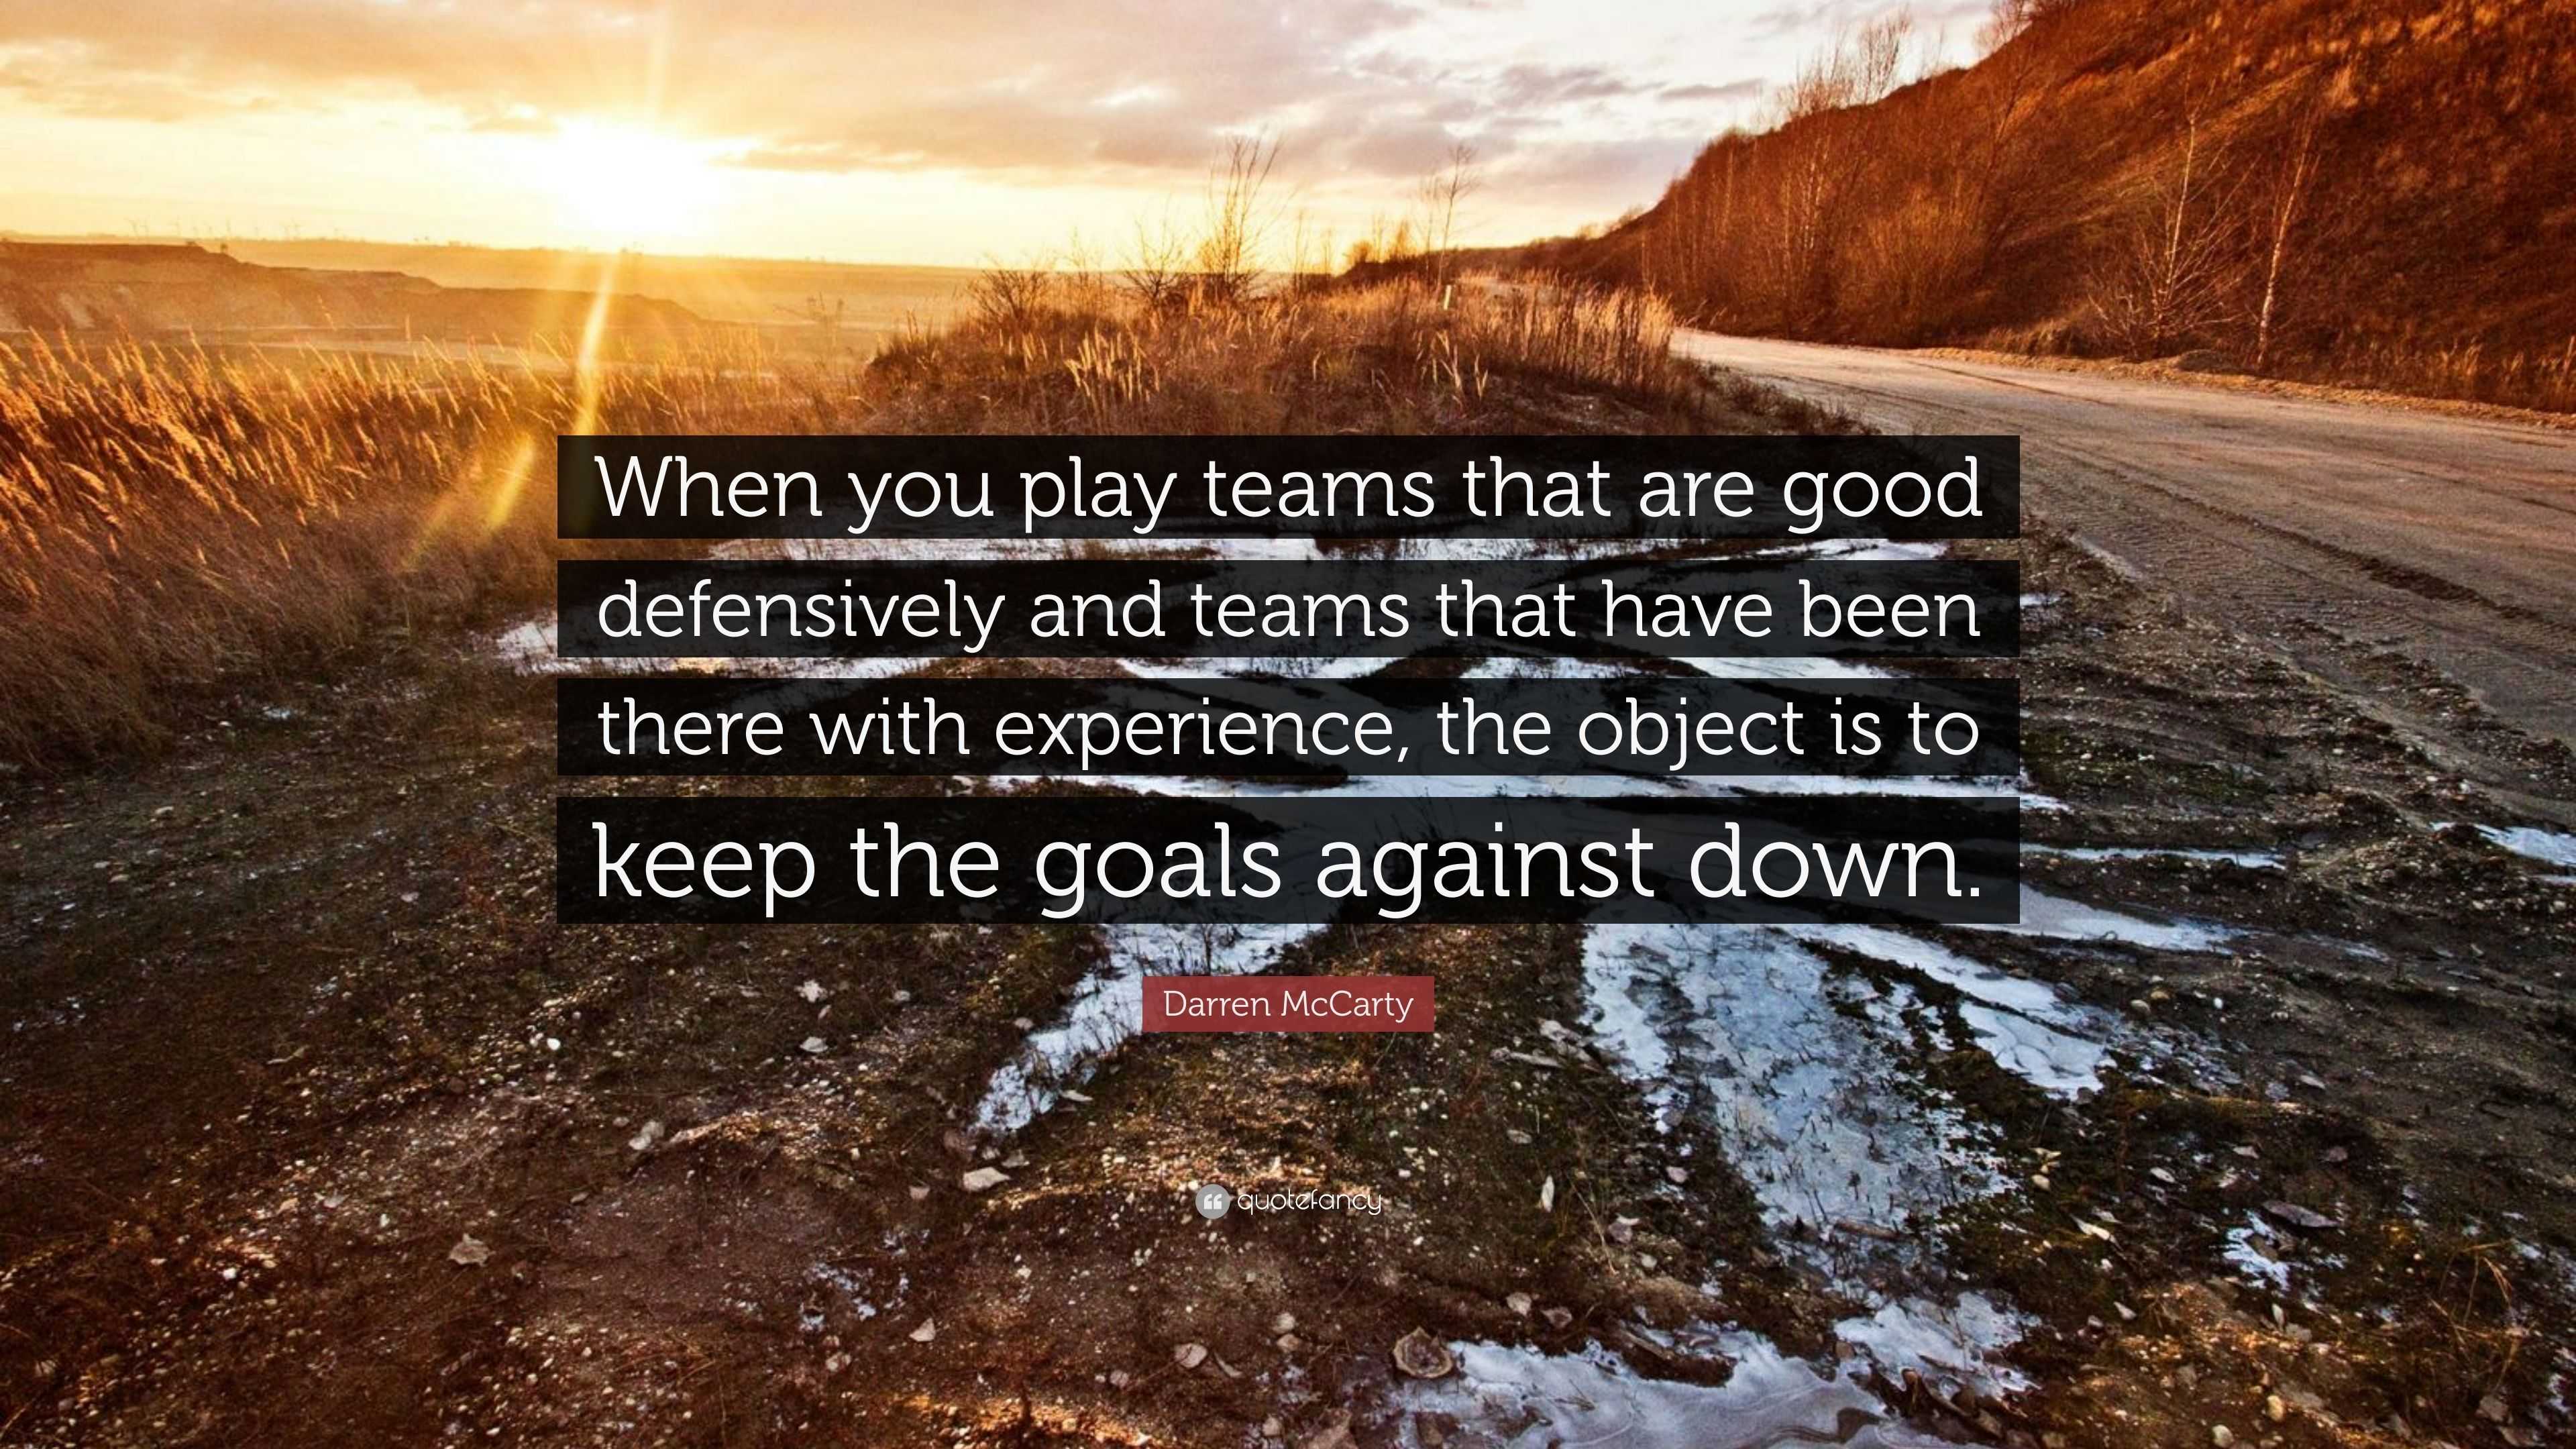 Darren McCarty Quote: “When you play teams that are good